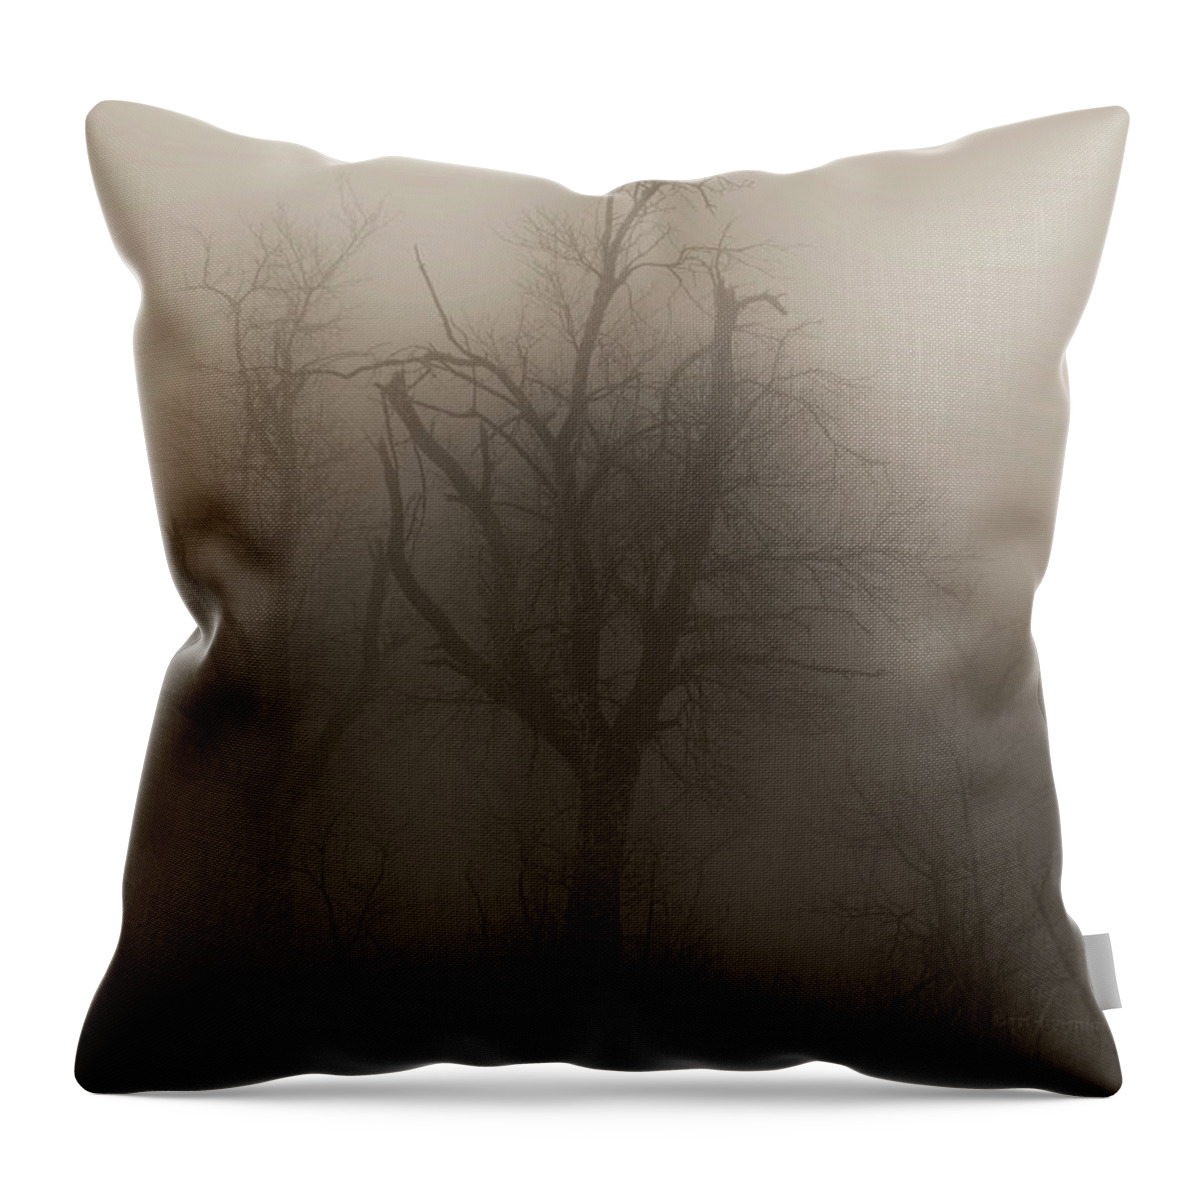 Fog Throw Pillow featuring the photograph Fog 008 by Mimulux Patricia No